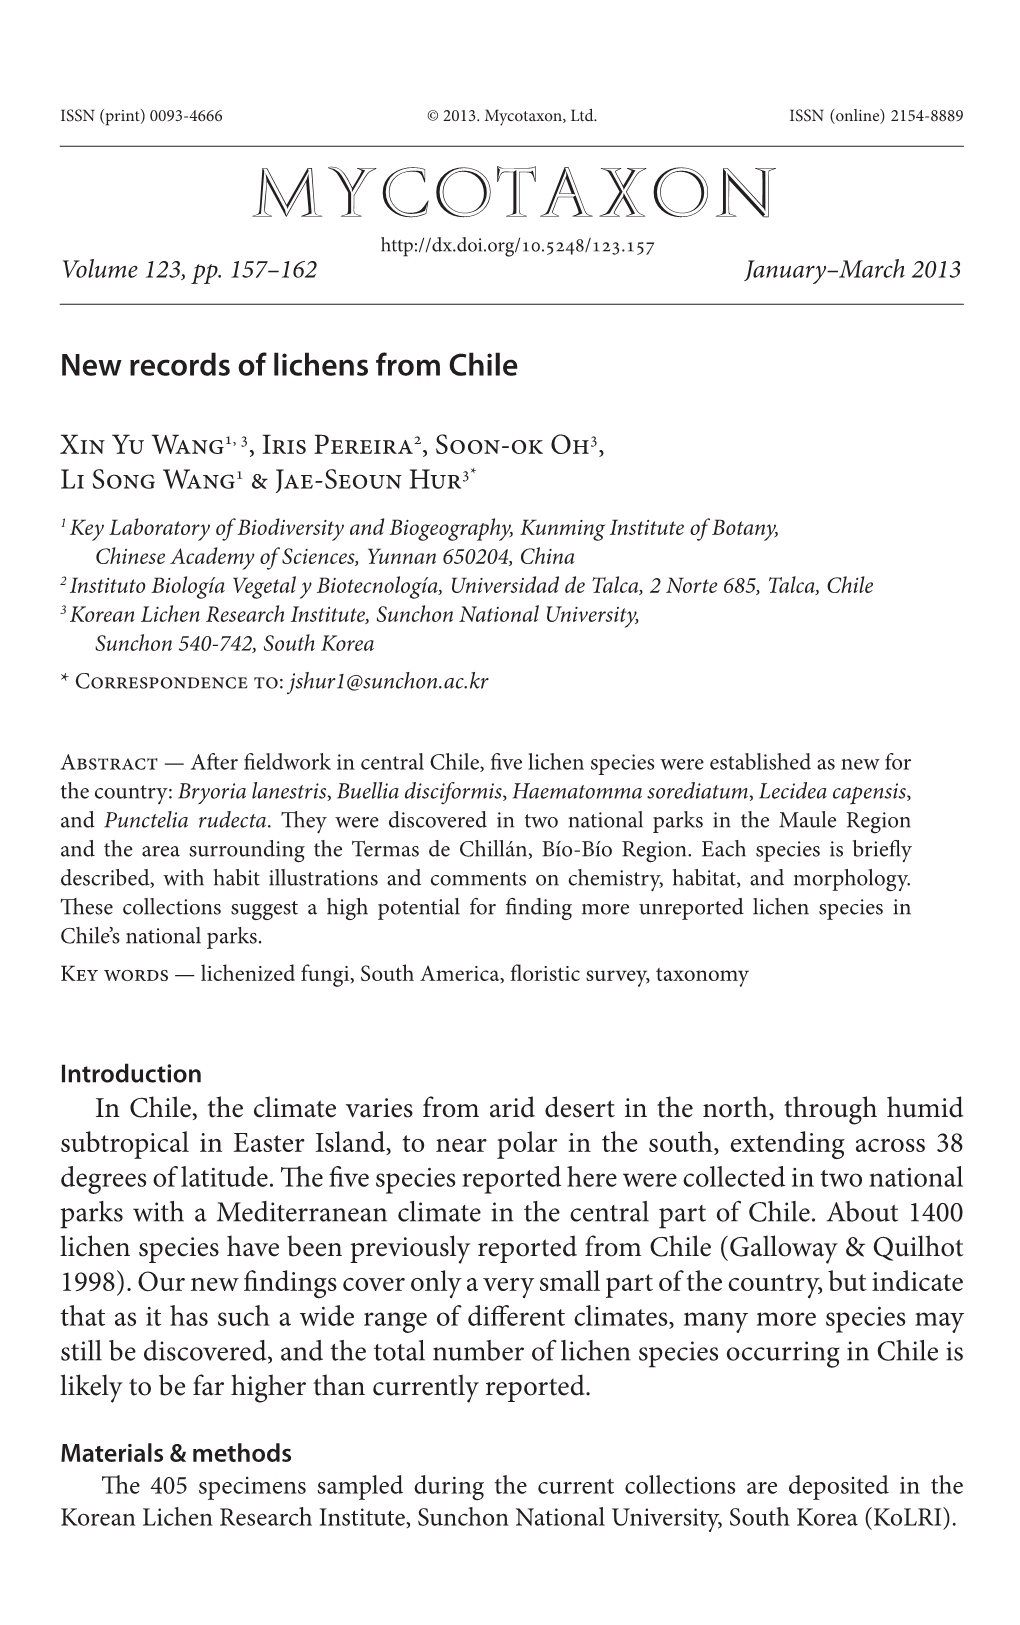 New Records of Lichens from Chile